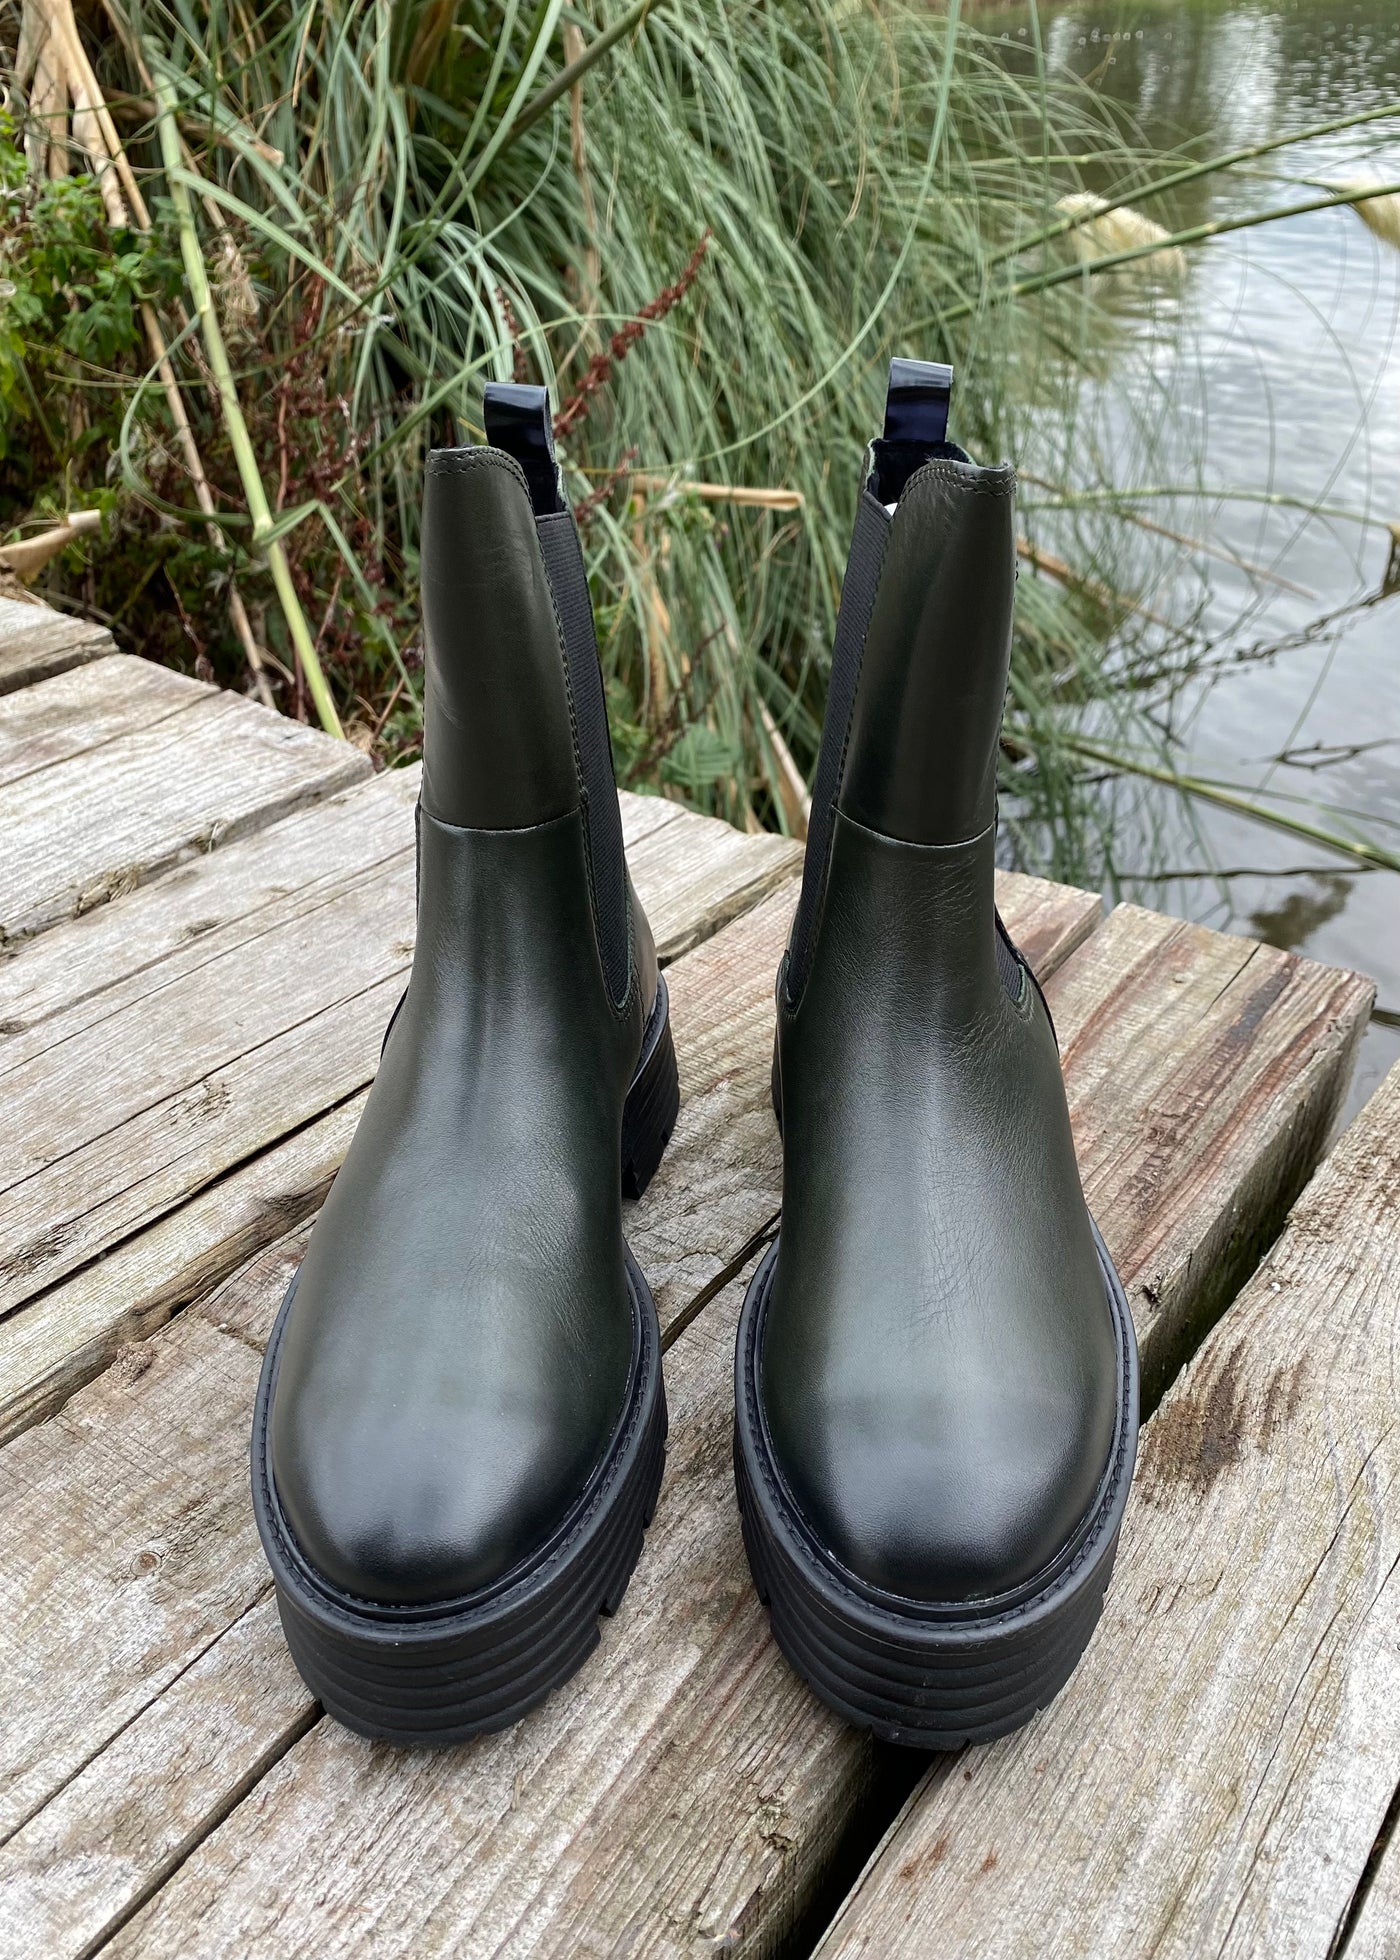 MT Leather Forest Green Chelsea Boots